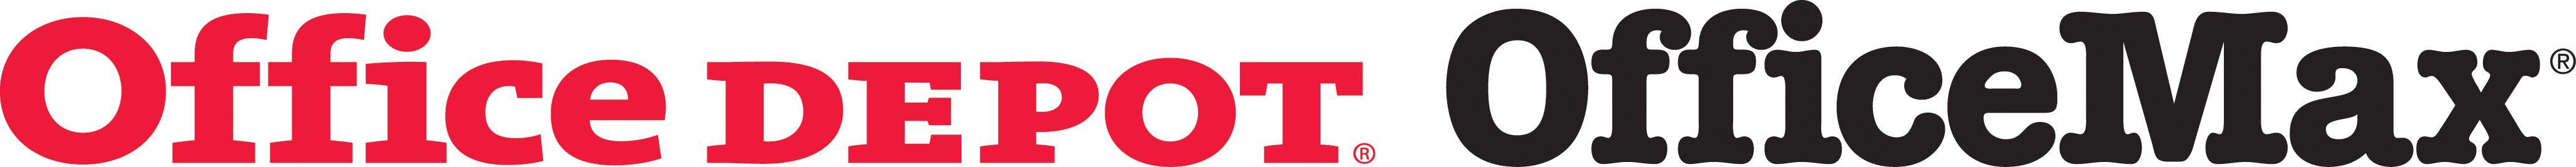 Office Depot Logo - Office Depot, Inc. Brings Innovation to Business Interior Design and ...